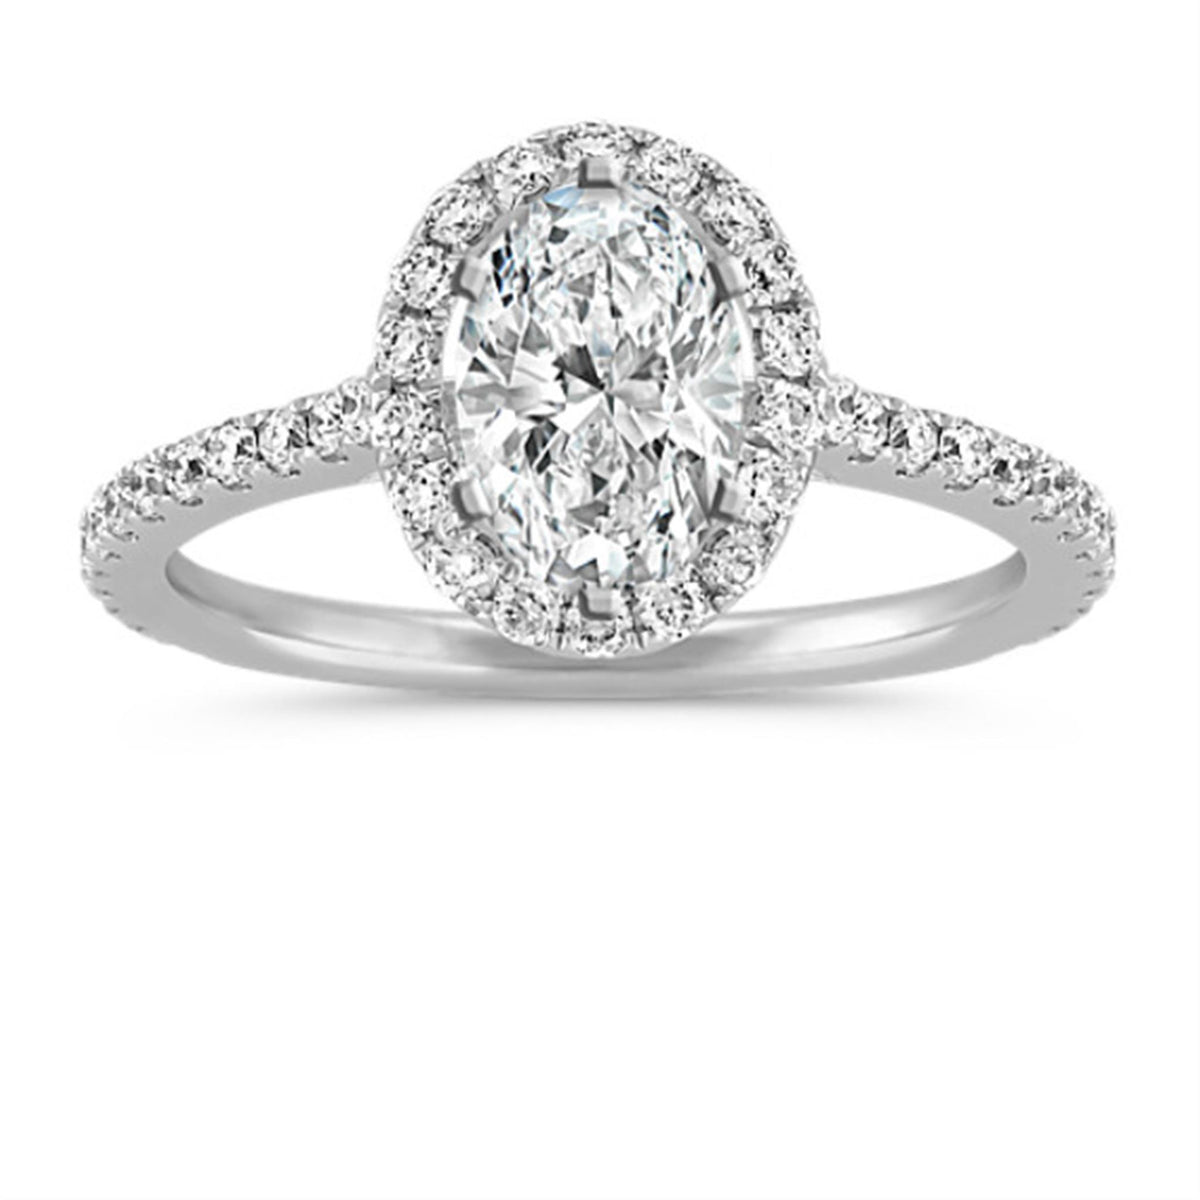 14Kt White Gold Giselle Oval Halo Ring With 1.01ct Natural Center Diamond